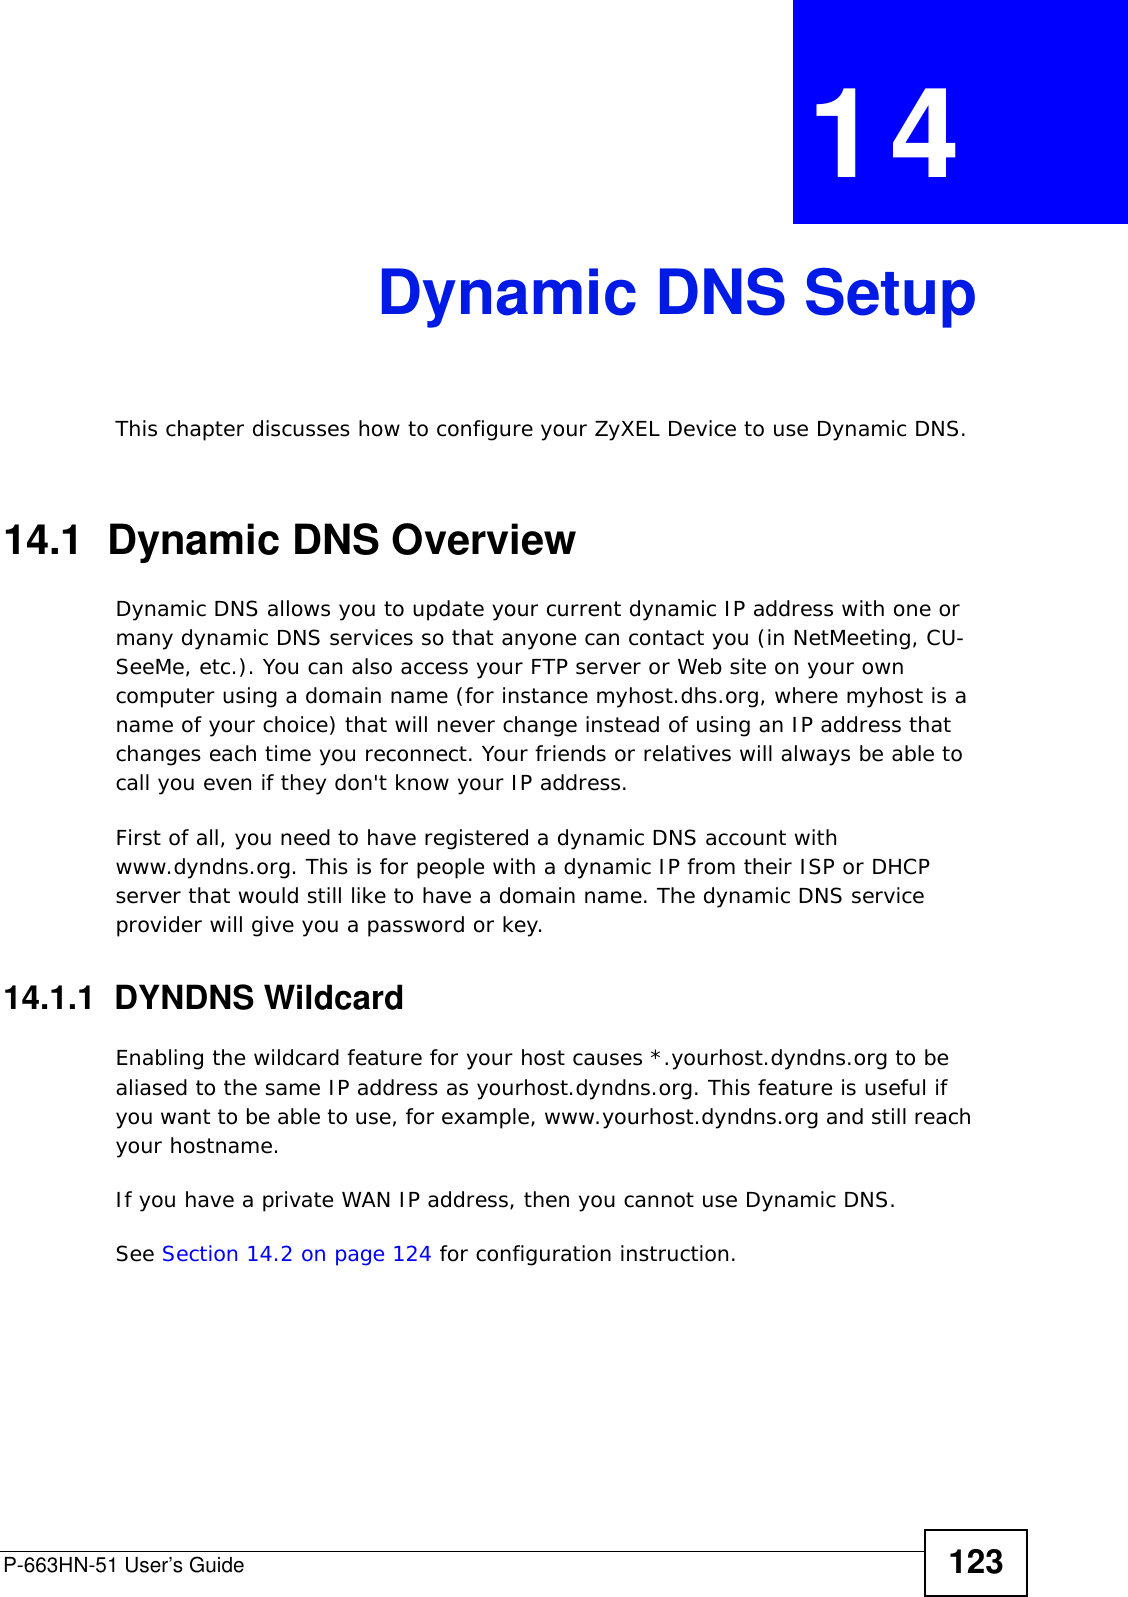 P-663HN-51 User’s Guide 123CHAPTER  14 Dynamic DNS SetupThis chapter discusses how to configure your ZyXEL Device to use Dynamic DNS.14.1  Dynamic DNS Overview Dynamic DNS allows you to update your current dynamic IP address with one or many dynamic DNS services so that anyone can contact you (in NetMeeting, CU-SeeMe, etc.). You can also access your FTP server or Web site on your own computer using a domain name (for instance myhost.dhs.org, where myhost is a name of your choice) that will never change instead of using an IP address that changes each time you reconnect. Your friends or relatives will always be able to call you even if they don&apos;t know your IP address.First of all, you need to have registered a dynamic DNS account with www.dyndns.org. This is for people with a dynamic IP from their ISP or DHCP server that would still like to have a domain name. The dynamic DNS service provider will give you a password or key. 14.1.1  DYNDNS WildcardEnabling the wildcard feature for your host causes *.yourhost.dyndns.org to be aliased to the same IP address as yourhost.dyndns.org. This feature is useful if you want to be able to use, for example, www.yourhost.dyndns.org and still reach your hostname.If you have a private WAN IP address, then you cannot use Dynamic DNS.See Section 14.2 on page 124 for configuration instruction. 